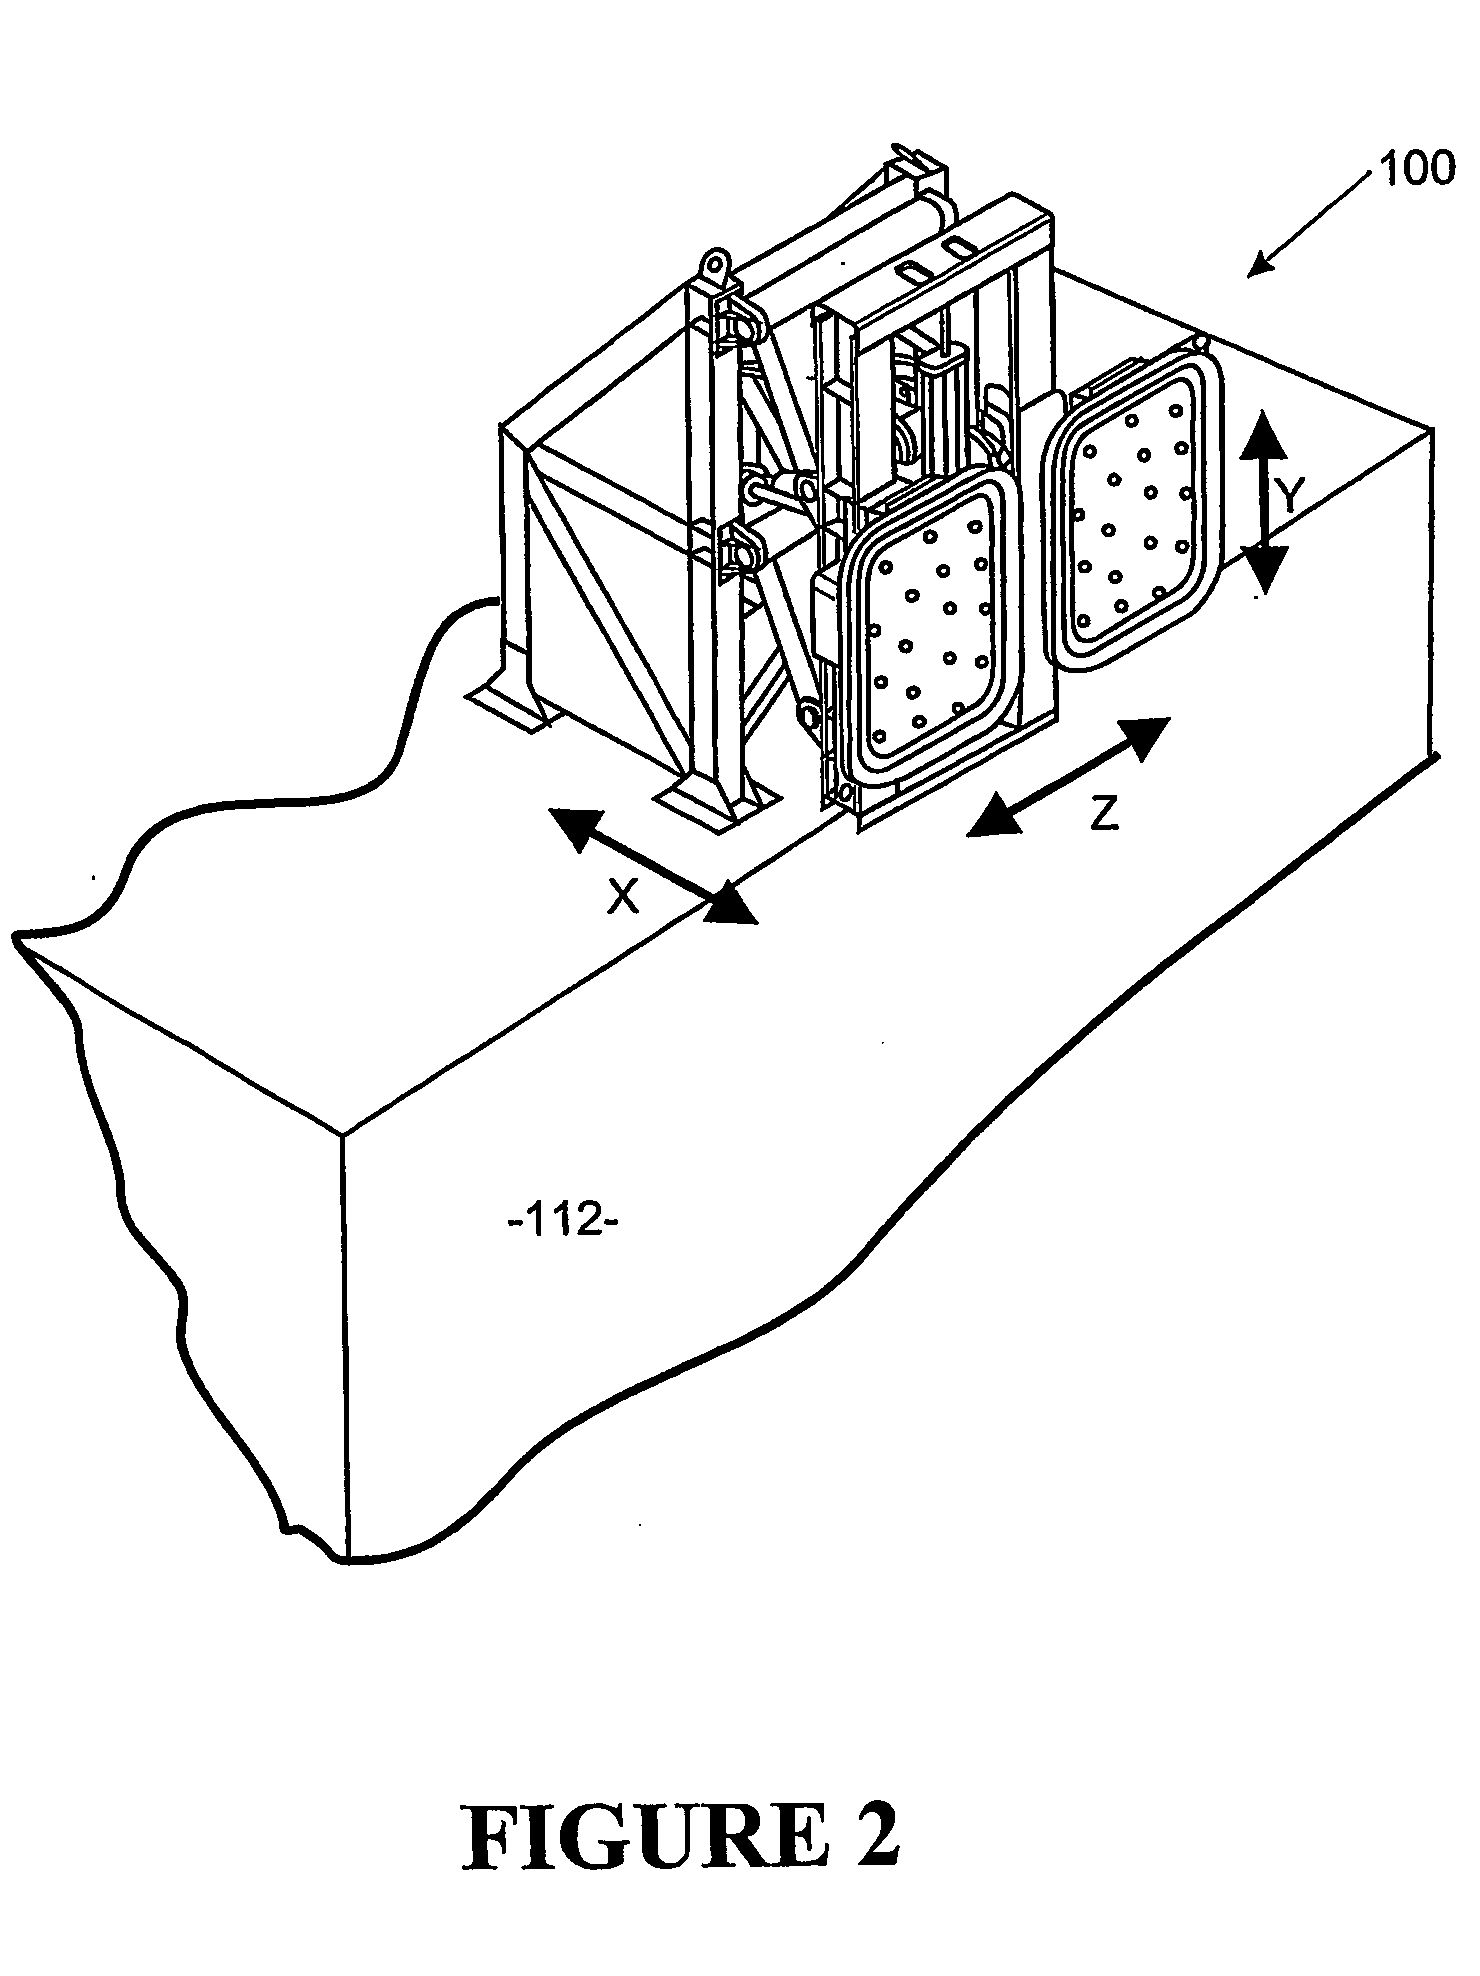 Mooring system with active control